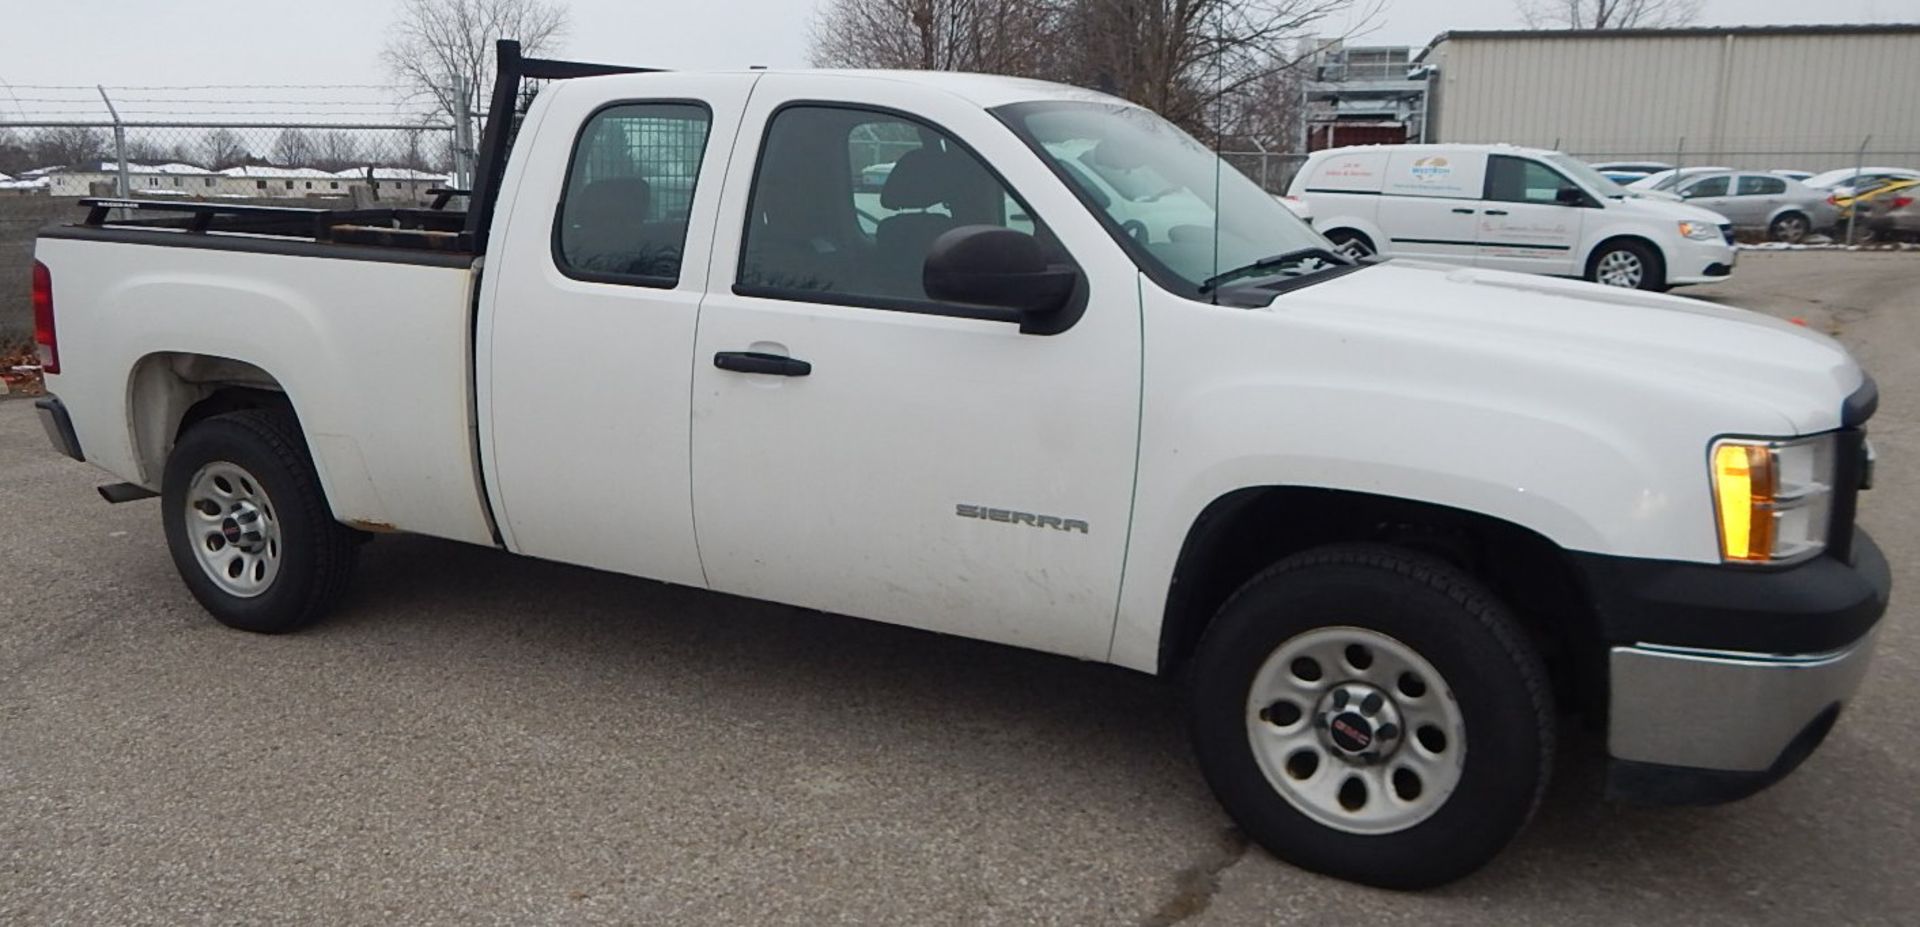 GMC (2010) SIERRA 1500 PICKUP TRUCK WITH 4.0L V6 GAS ENGINE, AUTOMATIC TRANSMISSION, MANUAL WINDOWS, - Image 2 of 4